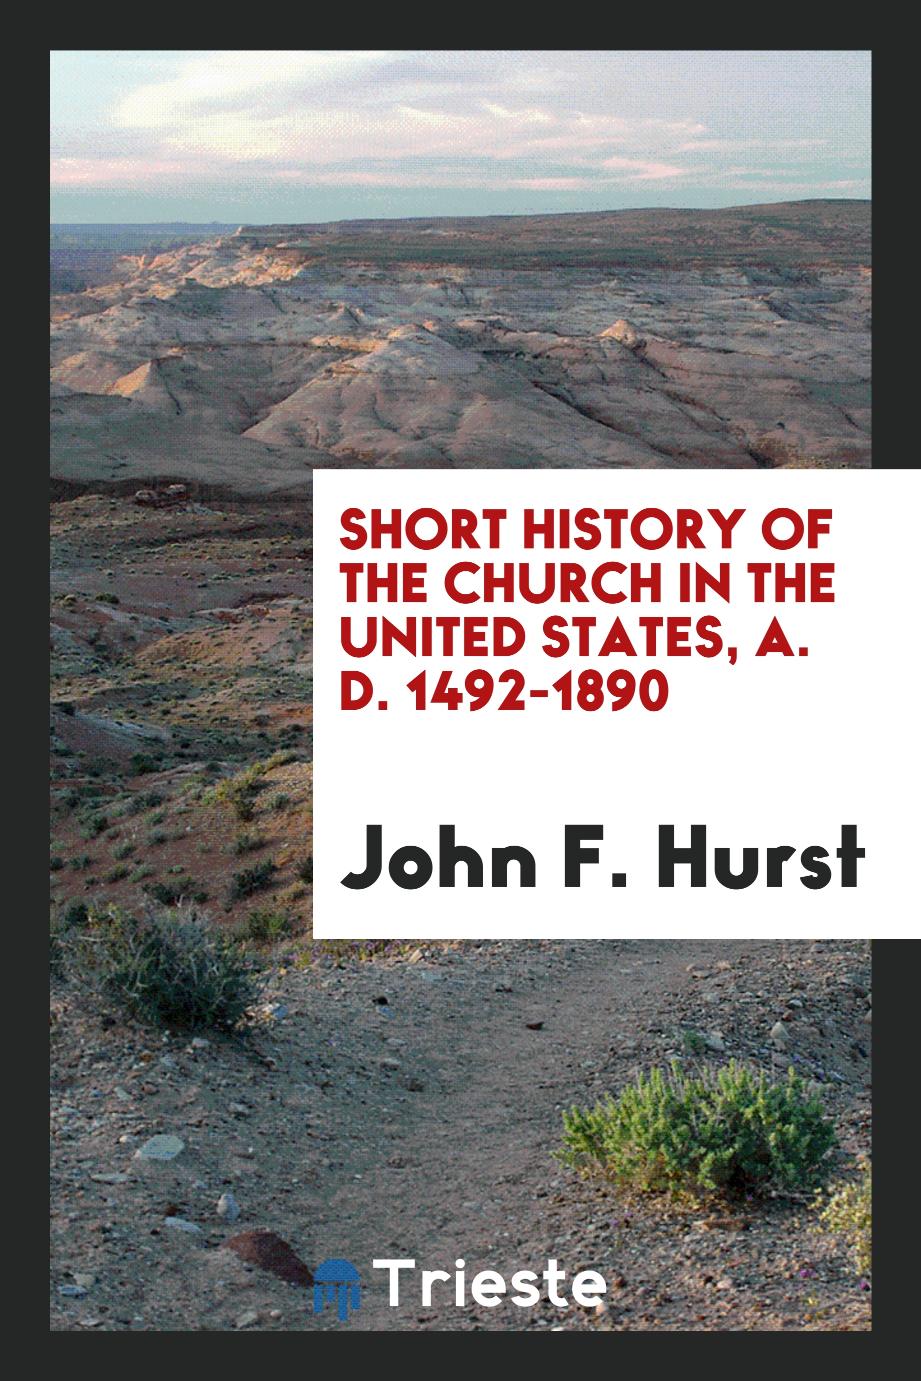 Short History of the Church in the United States, A. D. 1492-1890